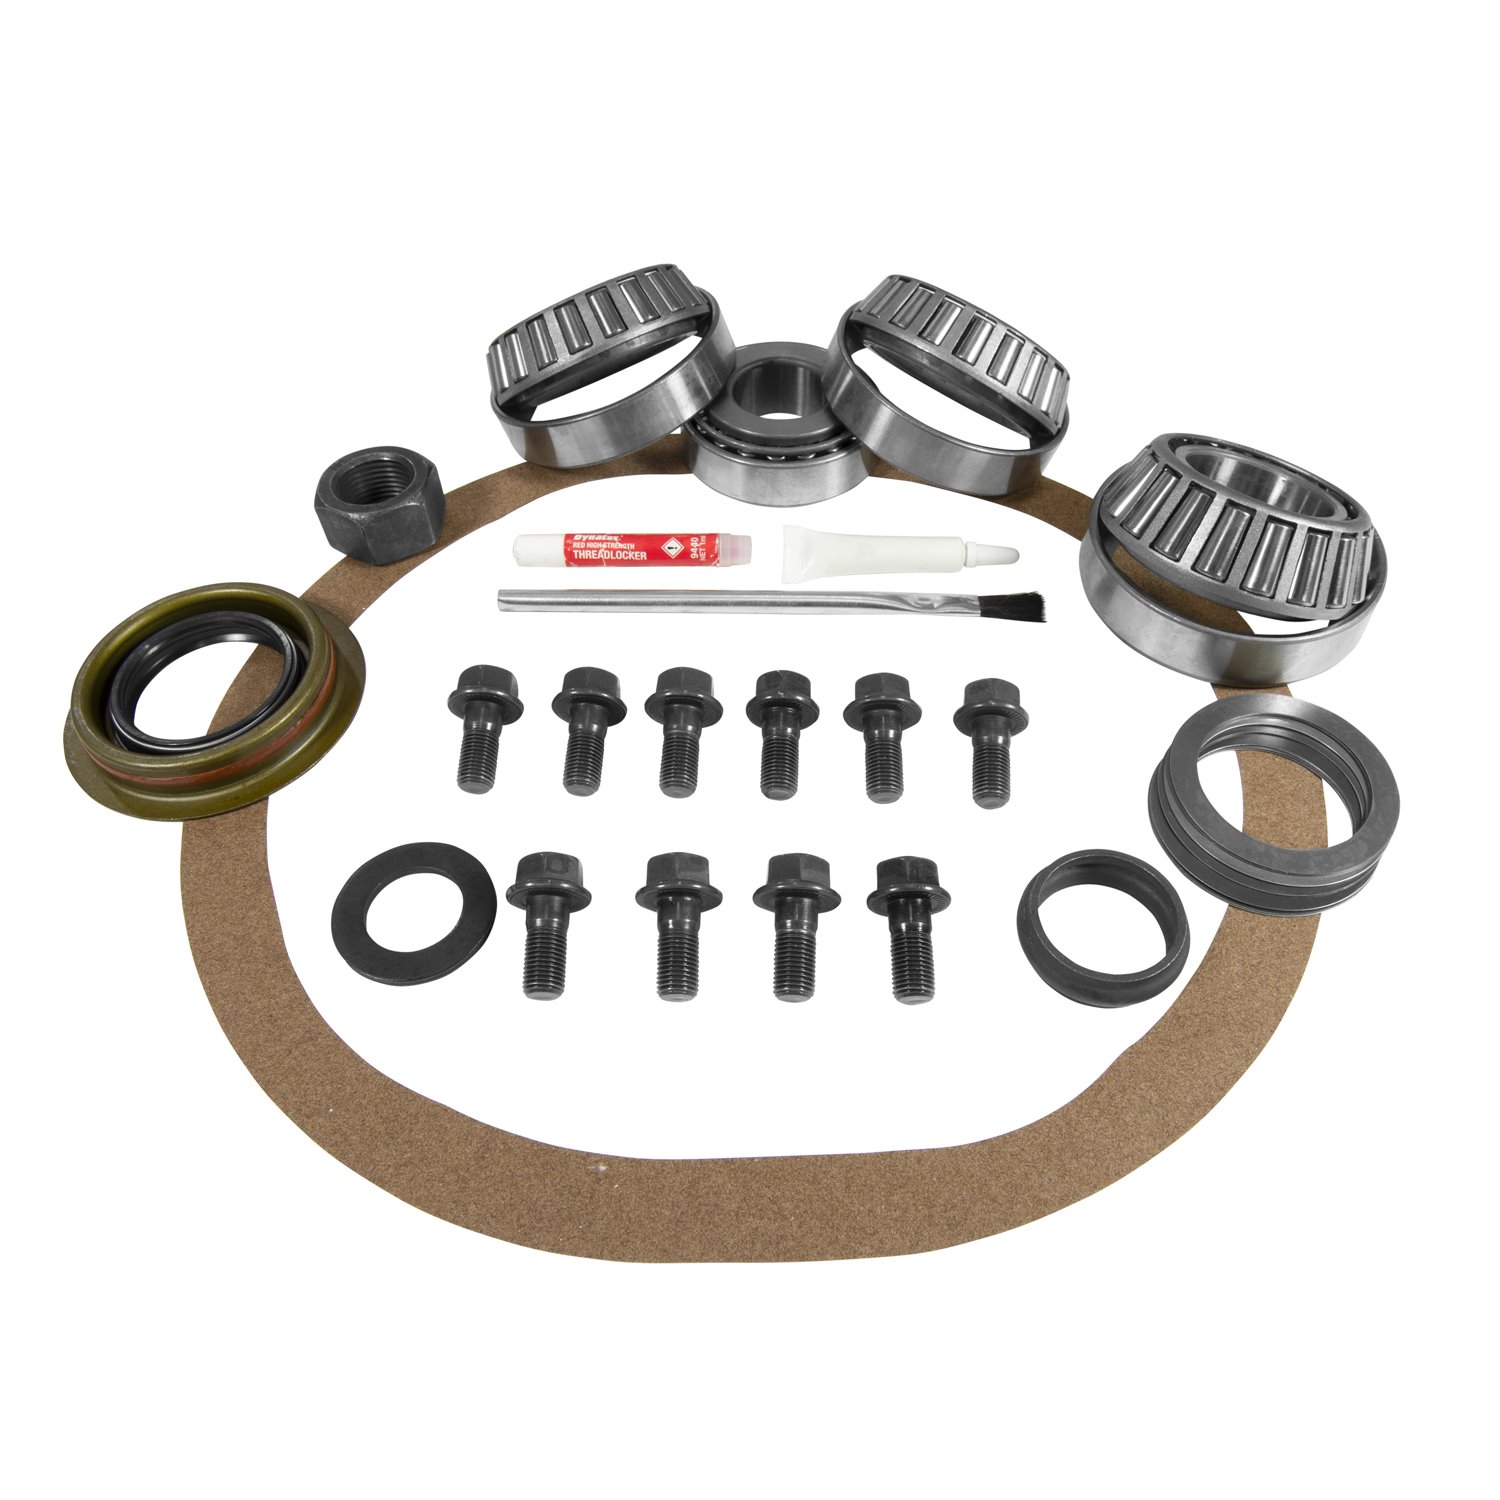 USA Standard ZK C8.75-A Master Overhaul Kit, For Chrysler 8.75 in. #41 Housing With Lm104912/49 Carrier Brg